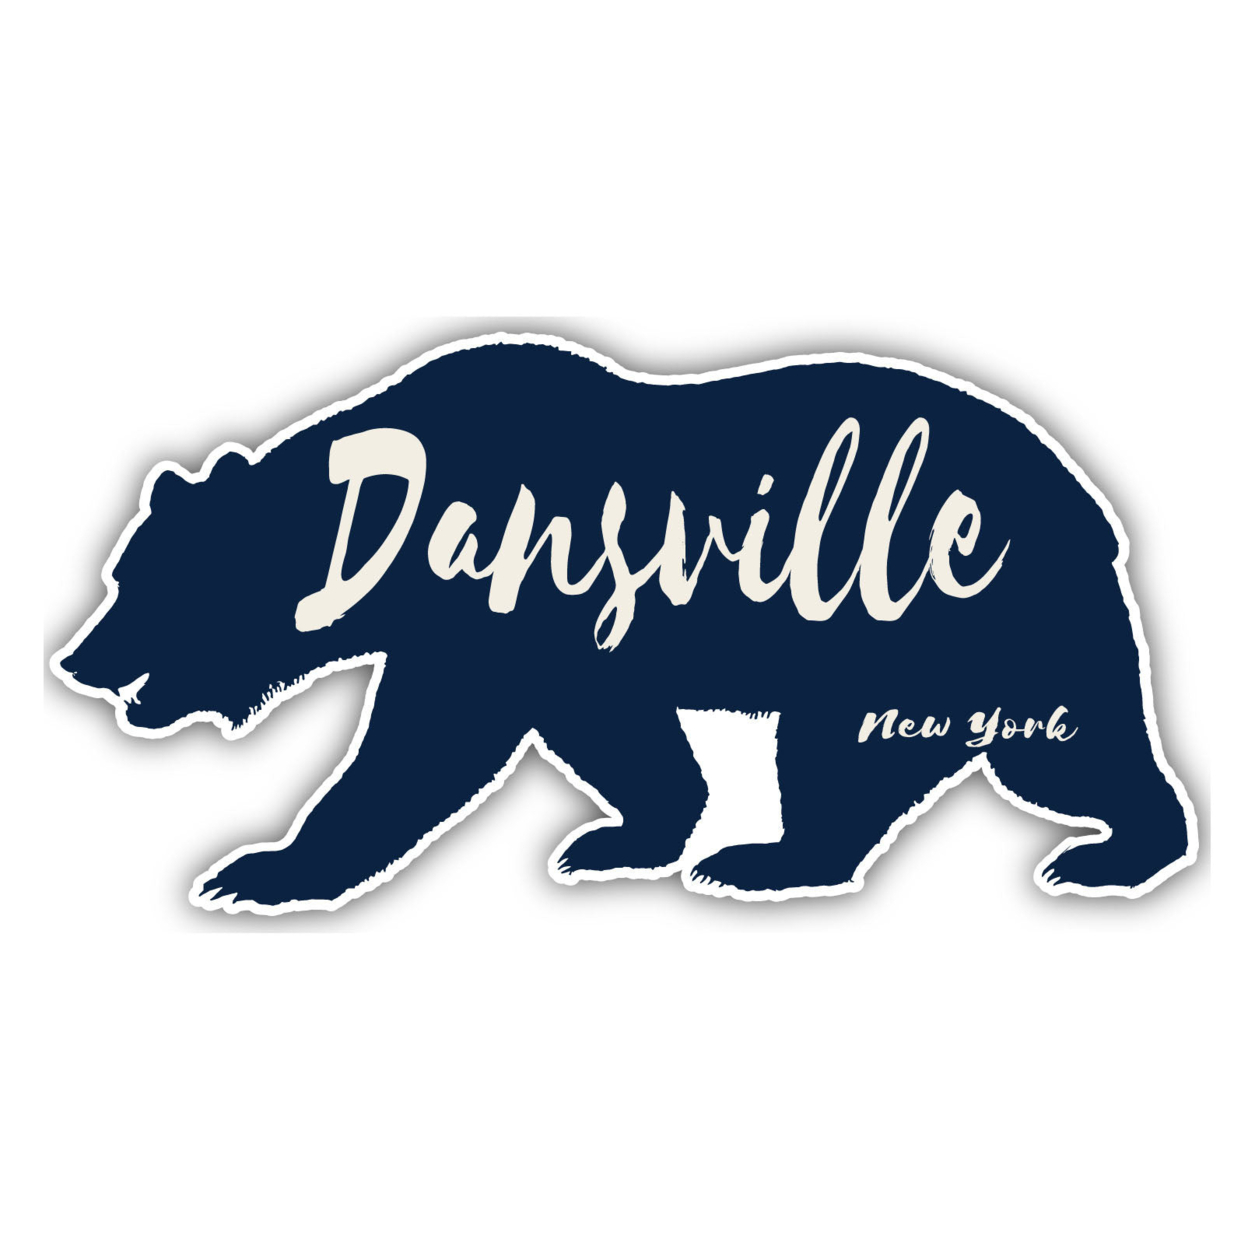 Dansville New York Souvenir Decorative Stickers (Choose Theme And Size) - 4-Pack, 4-Inch, Bear